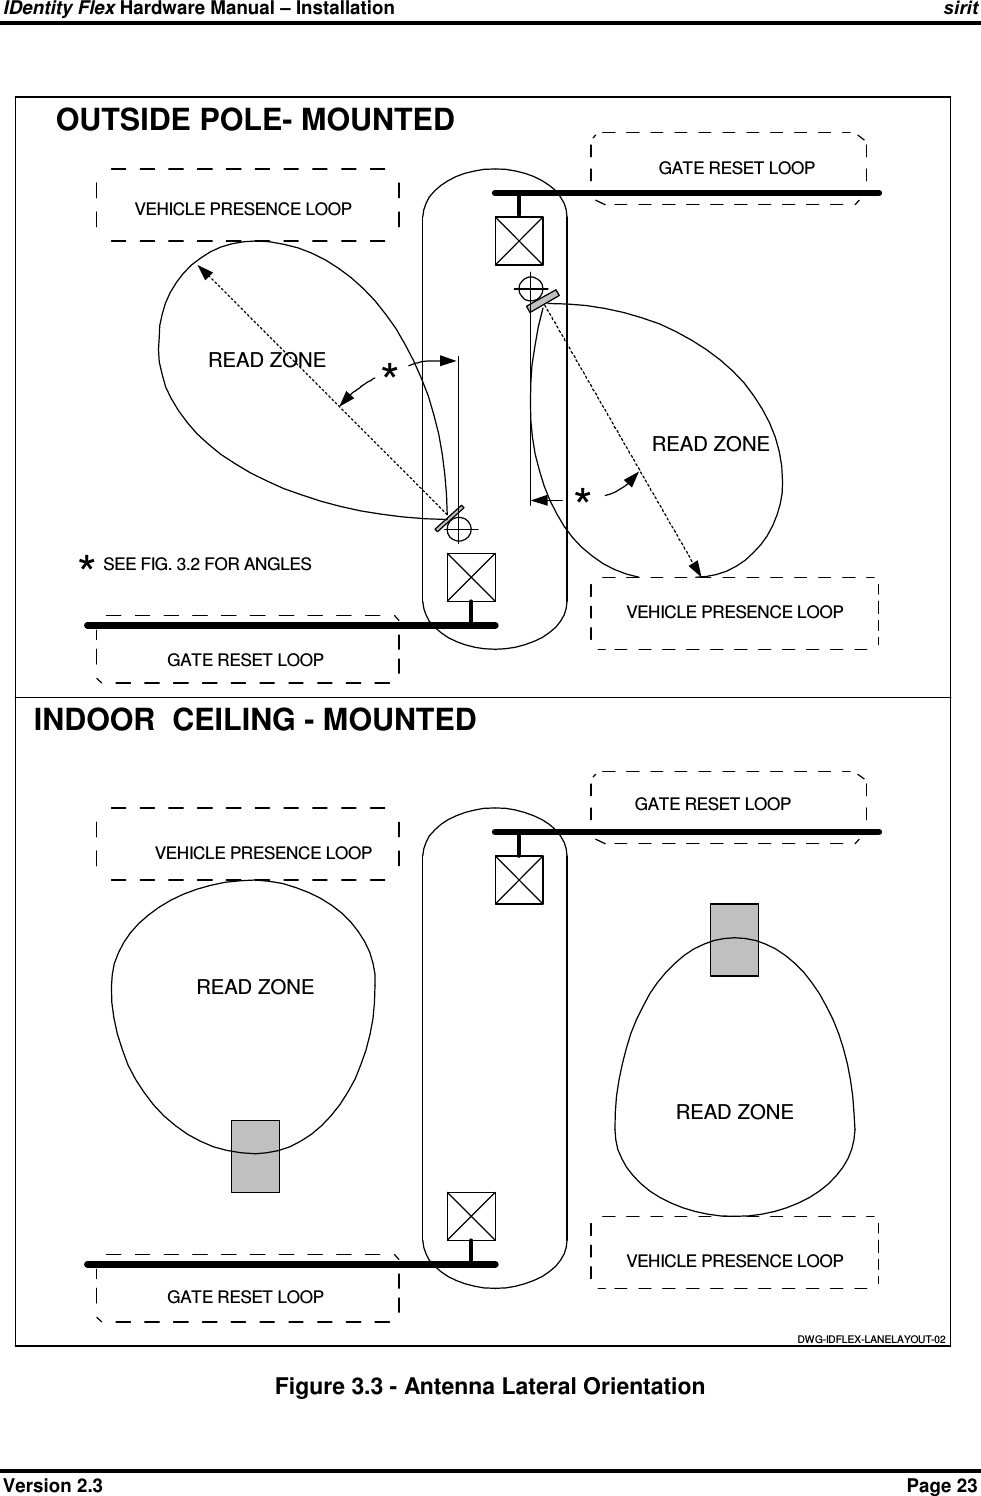 IDentity Flex Hardware Manual – Installation    sirit Version 2.3    Page 23 Figure 3.3 - Antenna Lateral Orientation READ ZONEVEHICLE PRESENCE LOOP GATE RESET LOOP GATE RESET LOOPREAD ZONEREAD ZONEVEHICLE PRESENCE LOOP GATE RESET LOOPVEHICLE PRESENCE LOOPREAD ZONE GATE RESET LOOPOUTSIDE POLE- MOUNTEDINDOOR  CEILING - MOUNTEDVEHICLE PRESENCE LOOPDWG-IDFLEX-LANELAYOUT-02***SEE FIG. 3.2 FOR ANGLES 